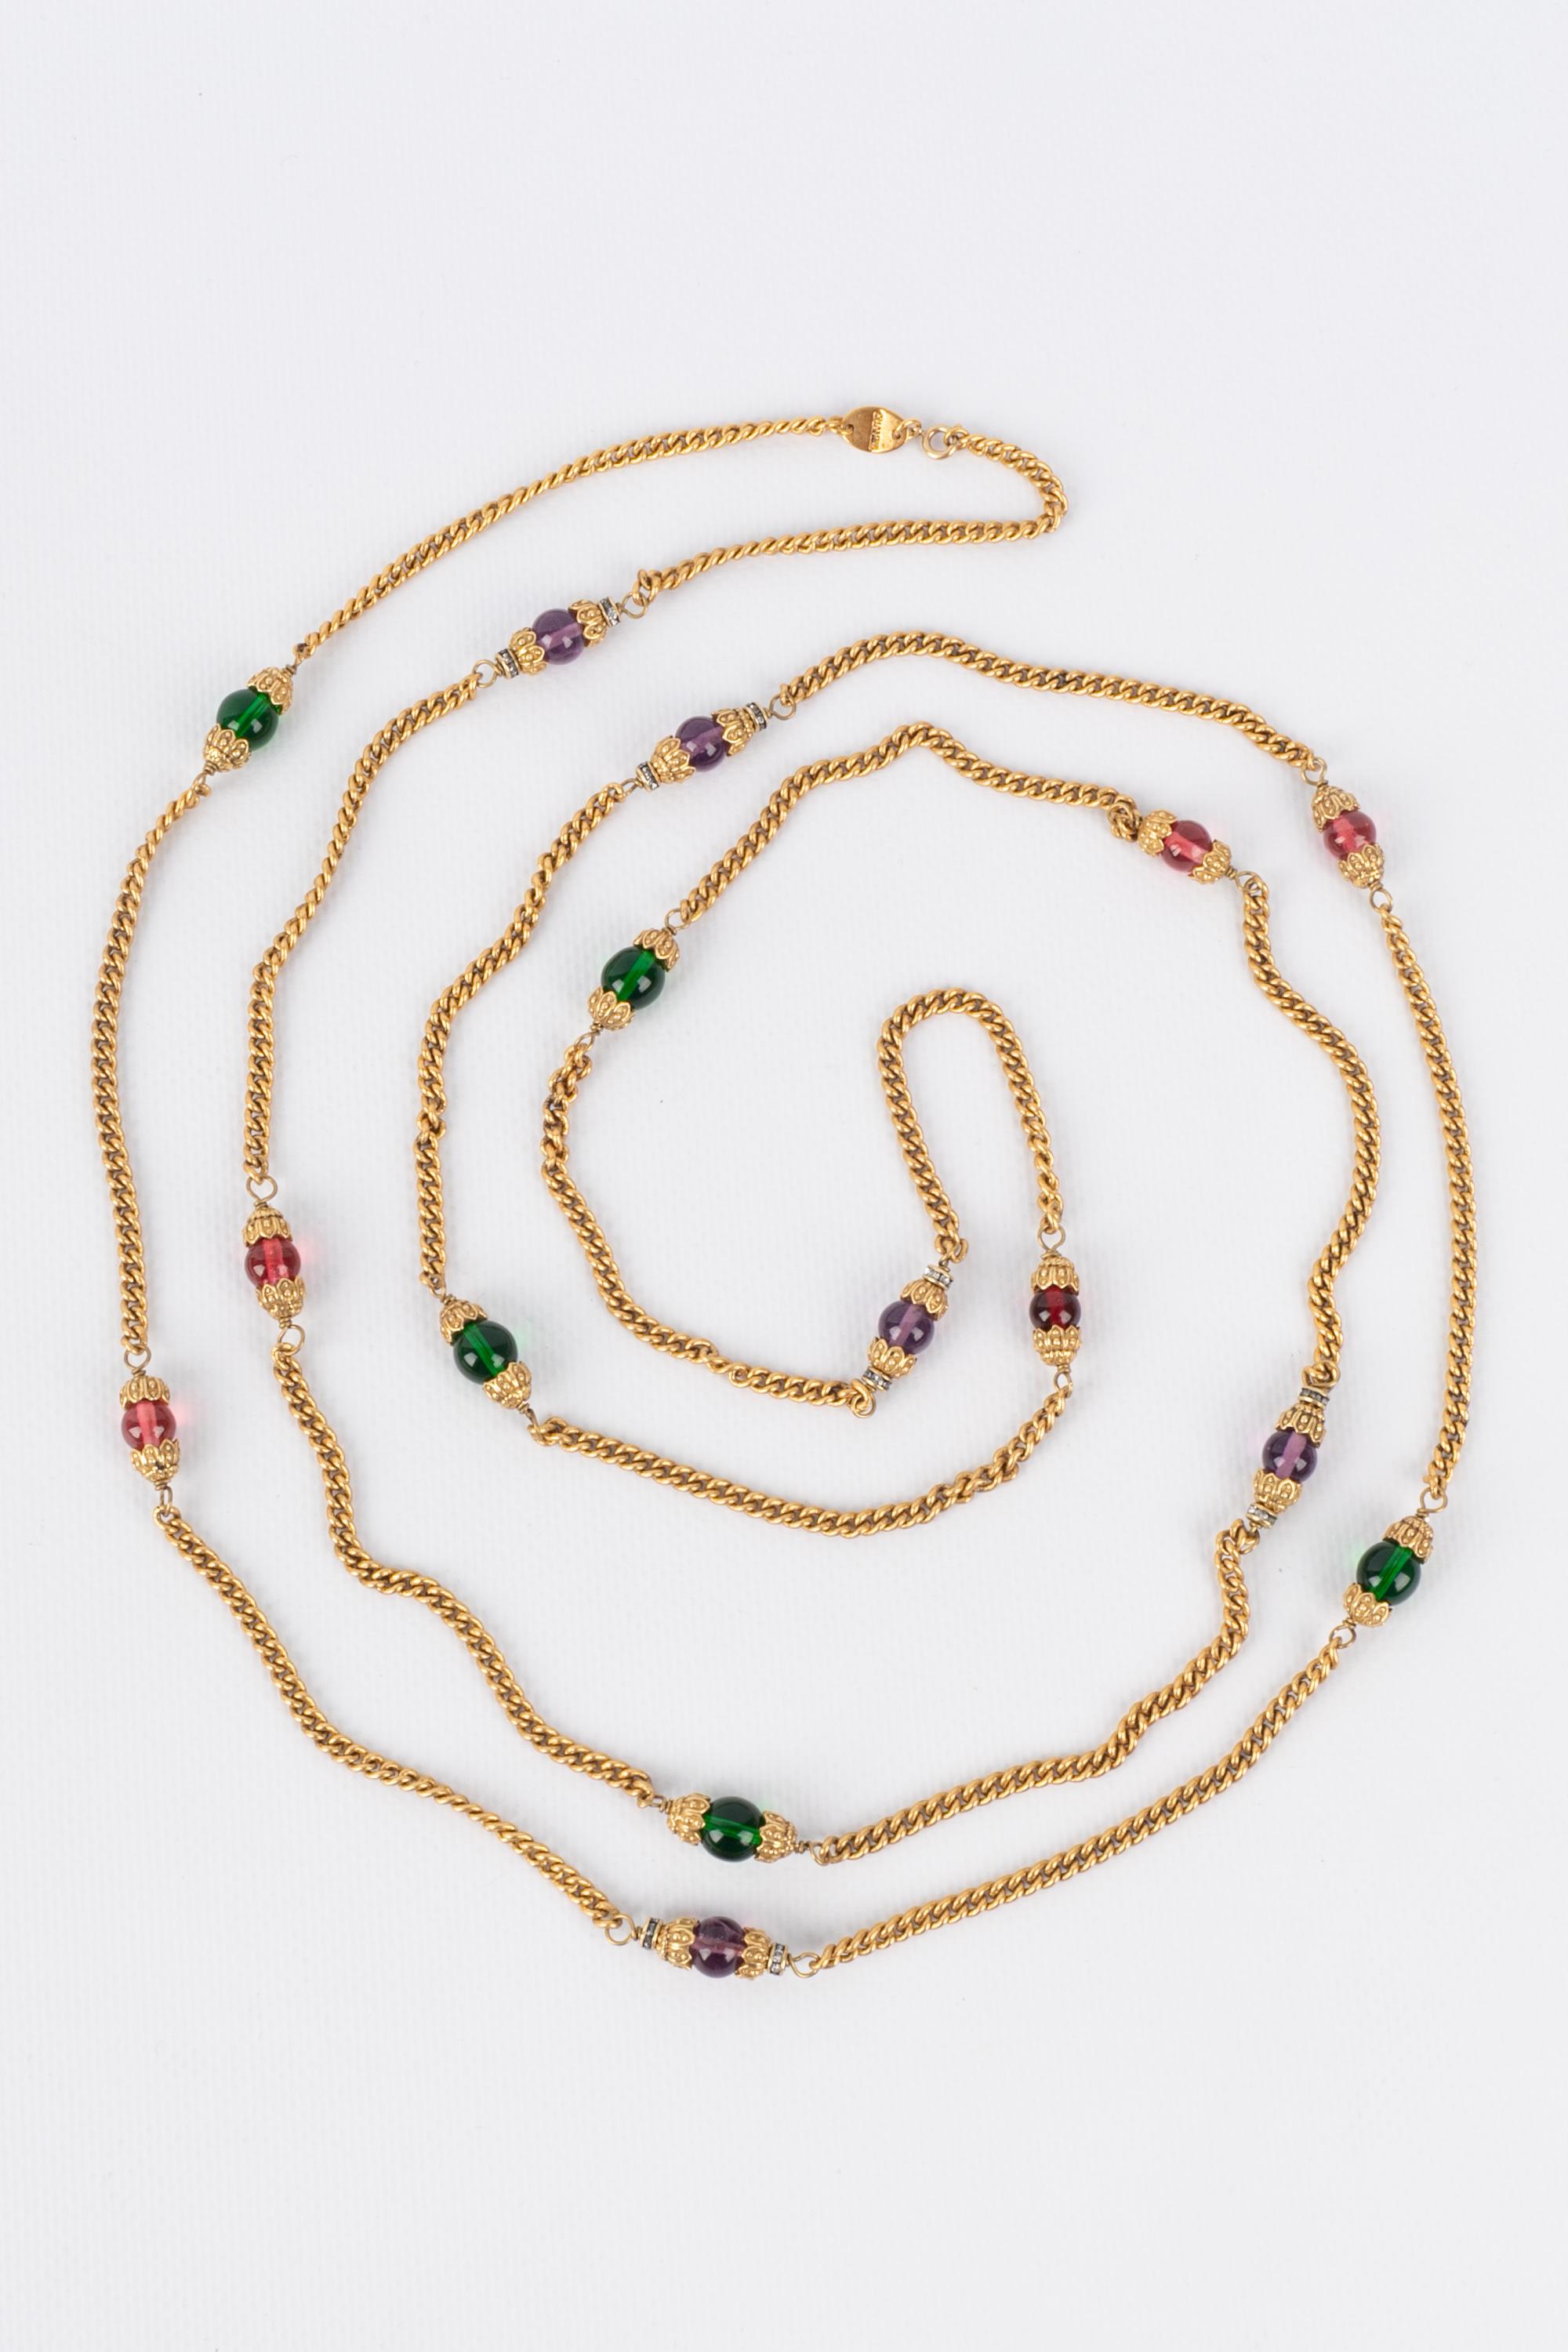 CHANEL - (Made in France) Golden metal sautoir with colored glass pearls. Jewelry from the 1970s.

Condition:
Very good condition

Dimensions:
Length: 195 cm

CB262